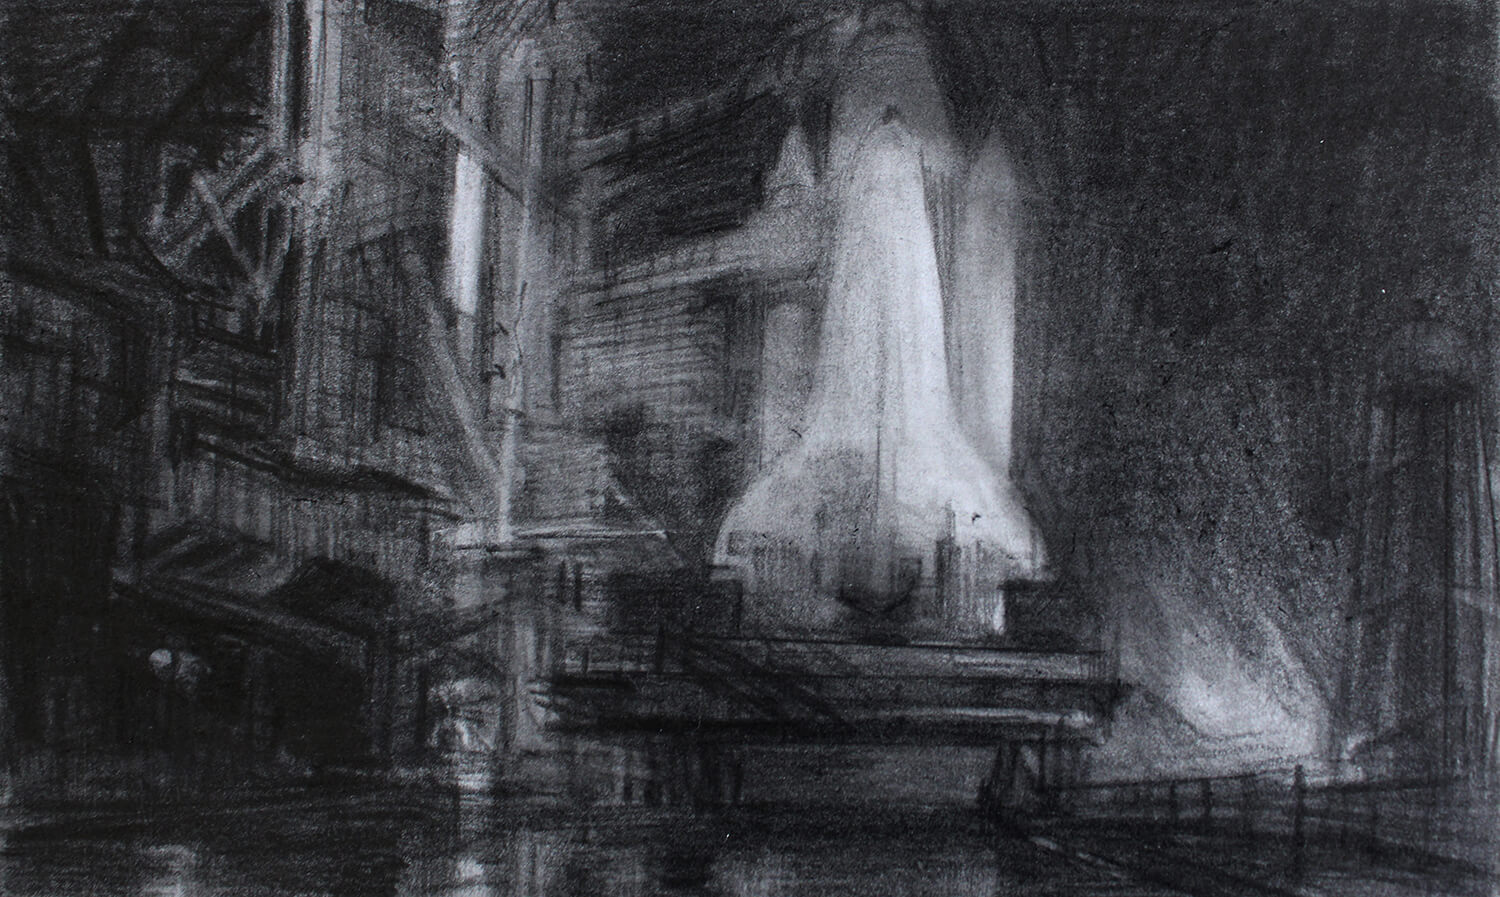 Martina Altschäfer, USA, Cape Canaveral, the final voyage STS-135 (28), 2021, graphite on cardboard, 10 x 16 cm